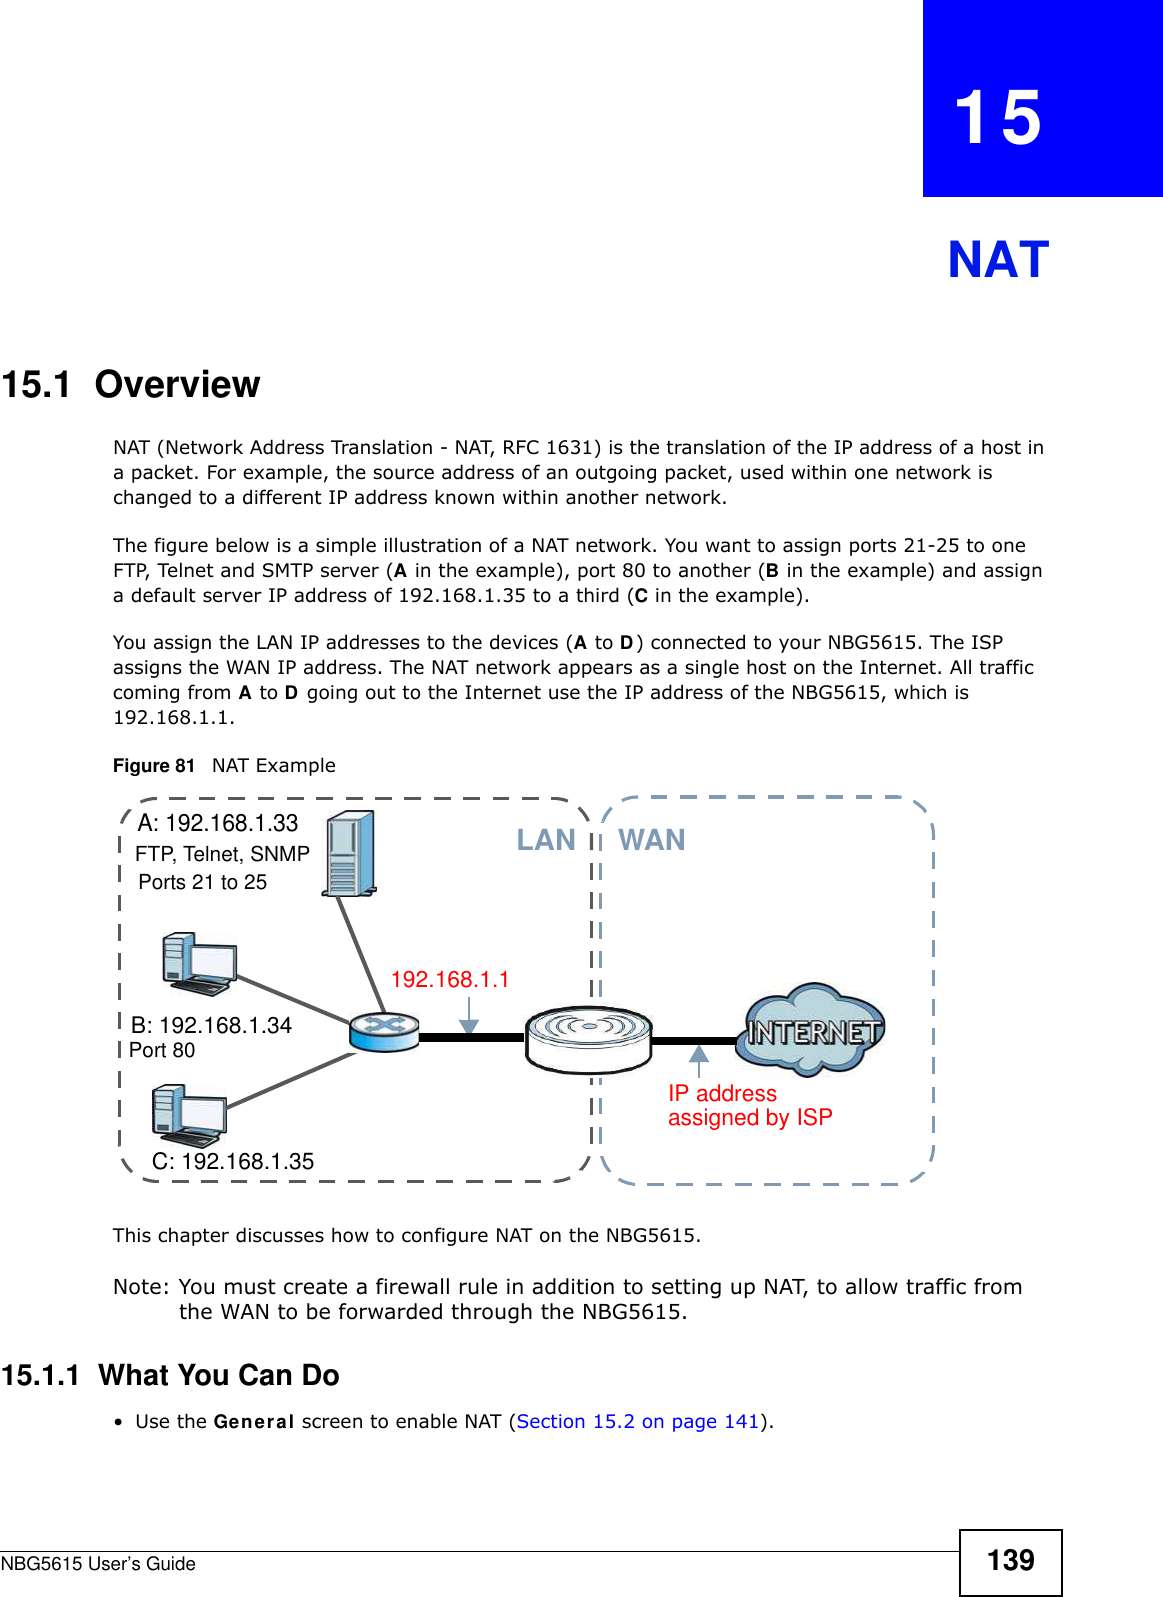 NBG5615 User’s Guide 139CHAPTER   15NAT15.1  Overview   NAT (Network Address Translation - NAT, RFC 1631) is the translation of the IP address of a host in a packet. For example, the source address of an outgoing packet, used within one network is changed to a different IP address known within another network.The figure below is a simple illustration of a NAT network. You want to assign ports 21-25 to one FTP, Telnet and SMTP server (A in the example), port 80 to another (B in the example) and assign a default server IP address of 192.168.1.35 to a third (C in the example). You assign the LAN IP addresses to the devices (A to D) connected to your NBG5615. The ISP assigns the WAN IP address. The NAT network appears as a single host on the Internet. All traffic coming from A to D going out to the Internet use the IP address of the NBG5615, which is 192.168.1.1.Figure 81   NAT ExampleThis chapter discusses how to configure NAT on the NBG5615.Note: You must create a firewall rule in addition to setting up NAT, to allow traffic from the WAN to be forwarded through the NBG5615.15.1.1  What You Can Do•Use the General screen to enable NAT (Section 15.2 on page 141).A: 192.168.1.33B: 192.168.1.34C: 192.168.1.35IP address 192.168.1.1WANLANassigned by ISPFTP, Telnet, SNMPPort 80Ports 21 to 25